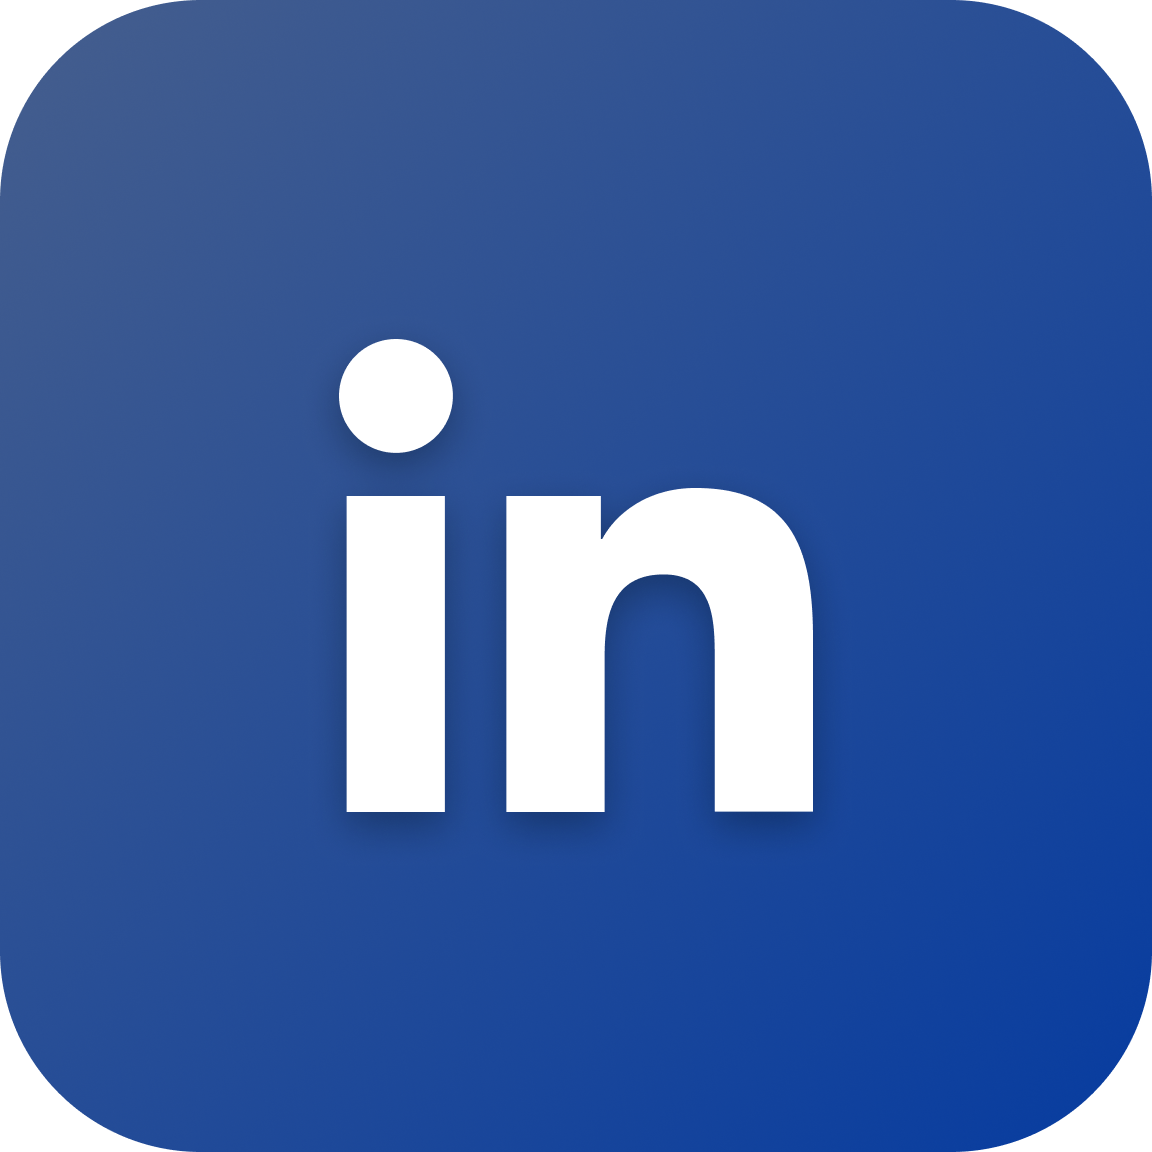 connect with linkedin